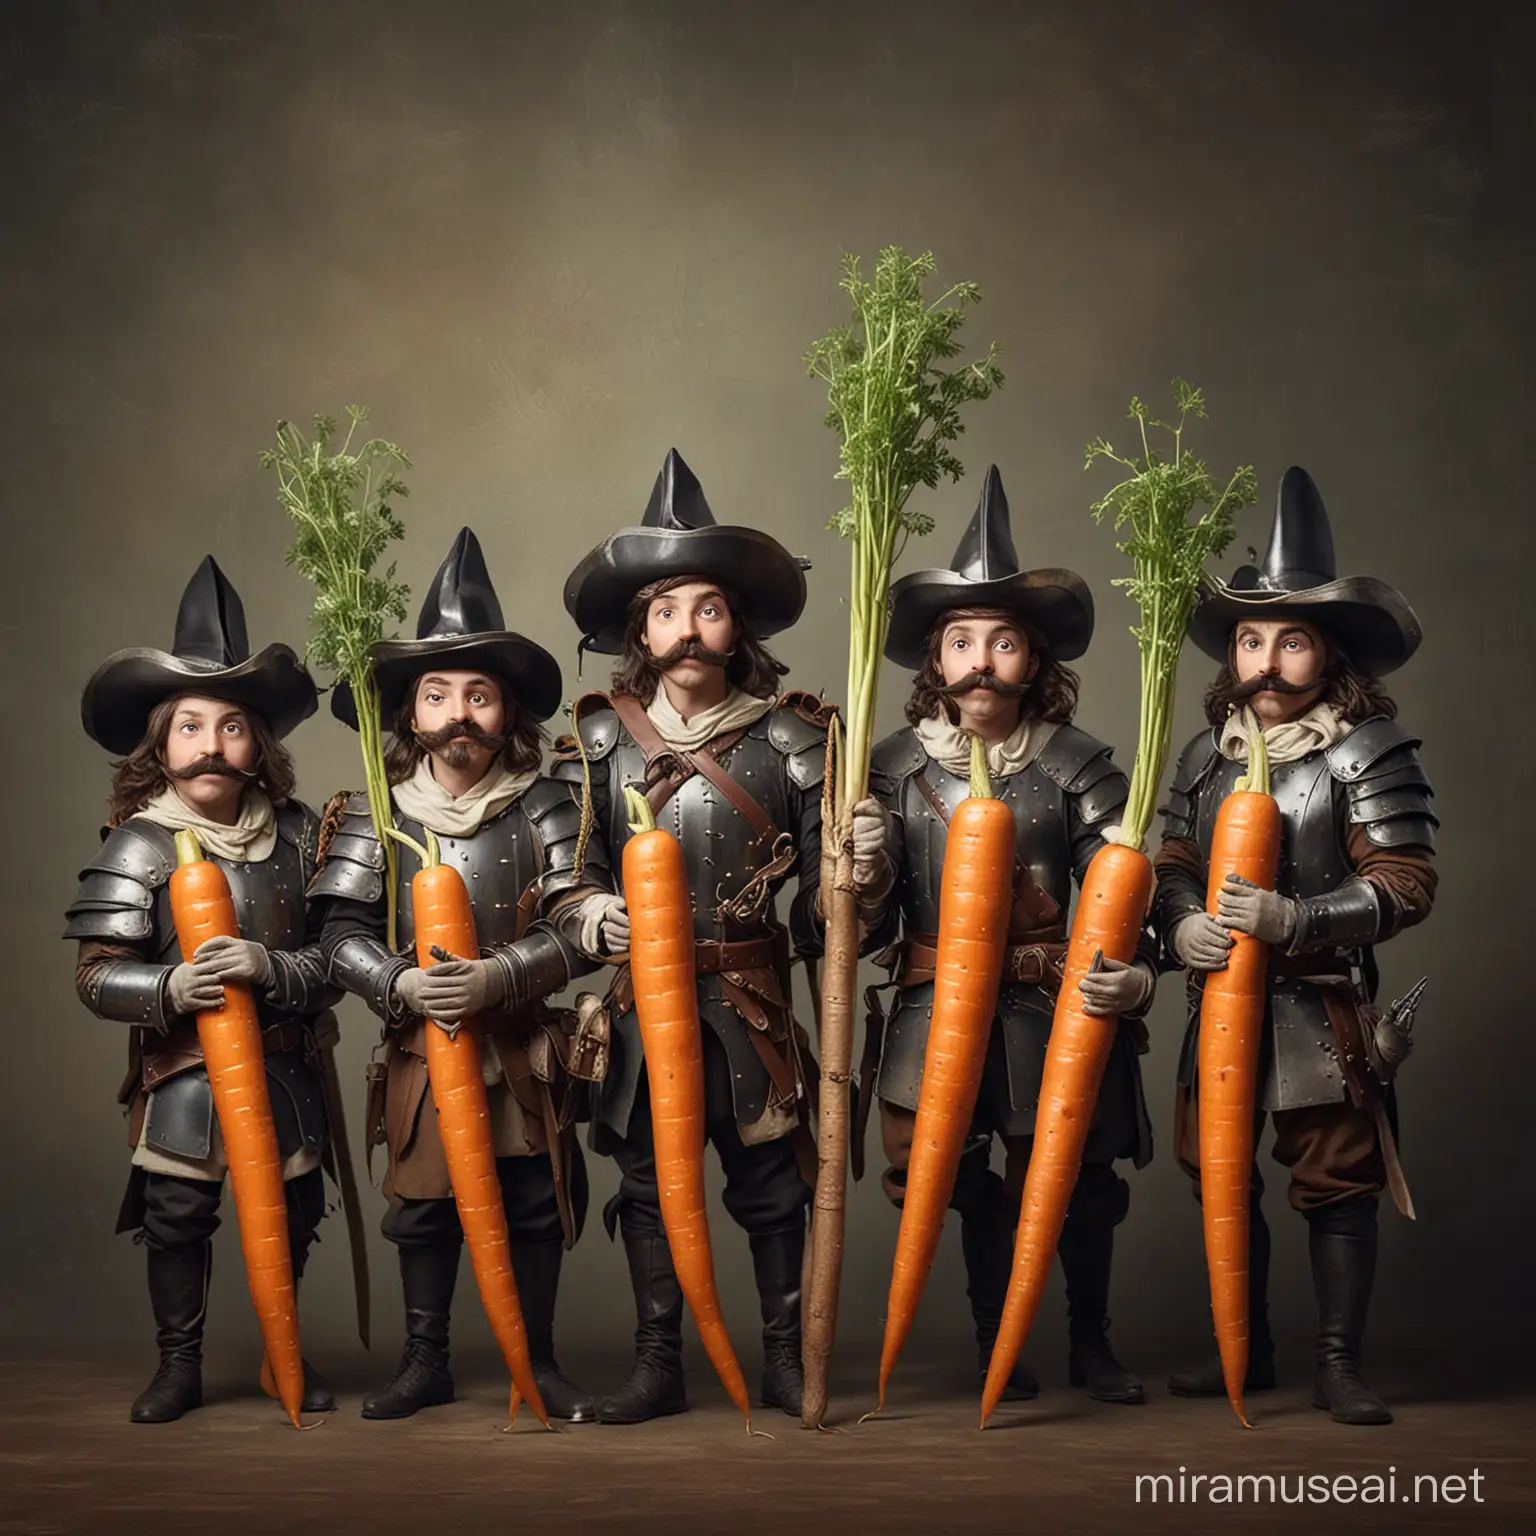 create image of dulling musketeers but holding long carrots instead of swords